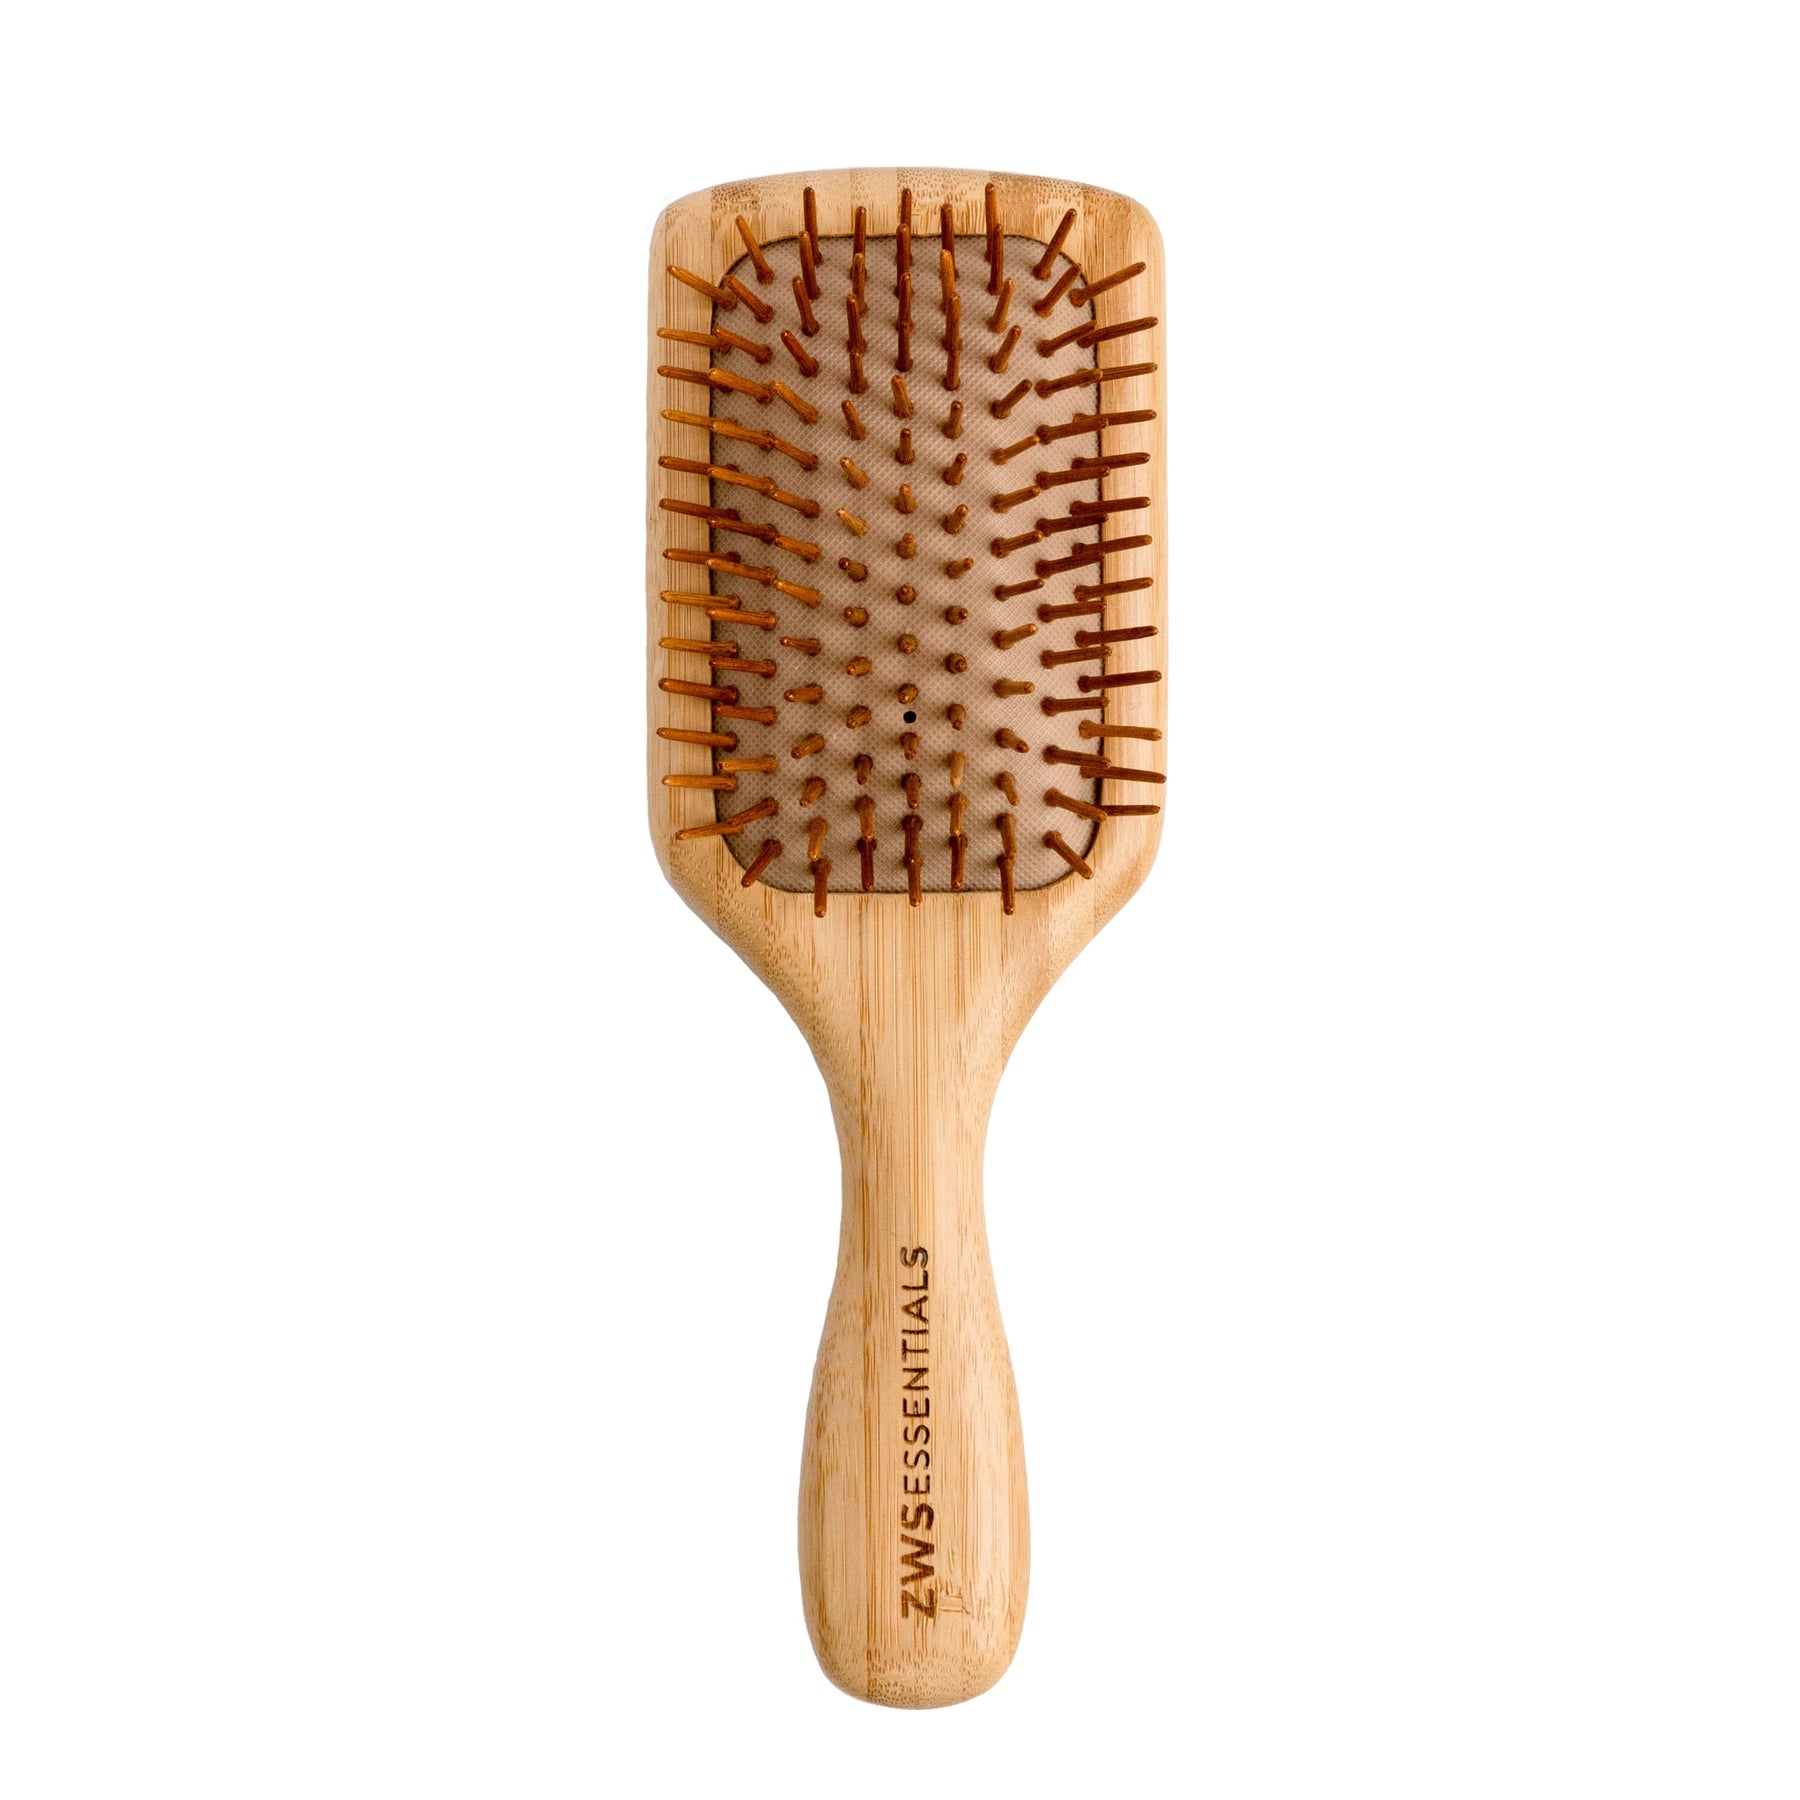 Large and Medium Size Round Wax Brushes Handcrafted in the USA